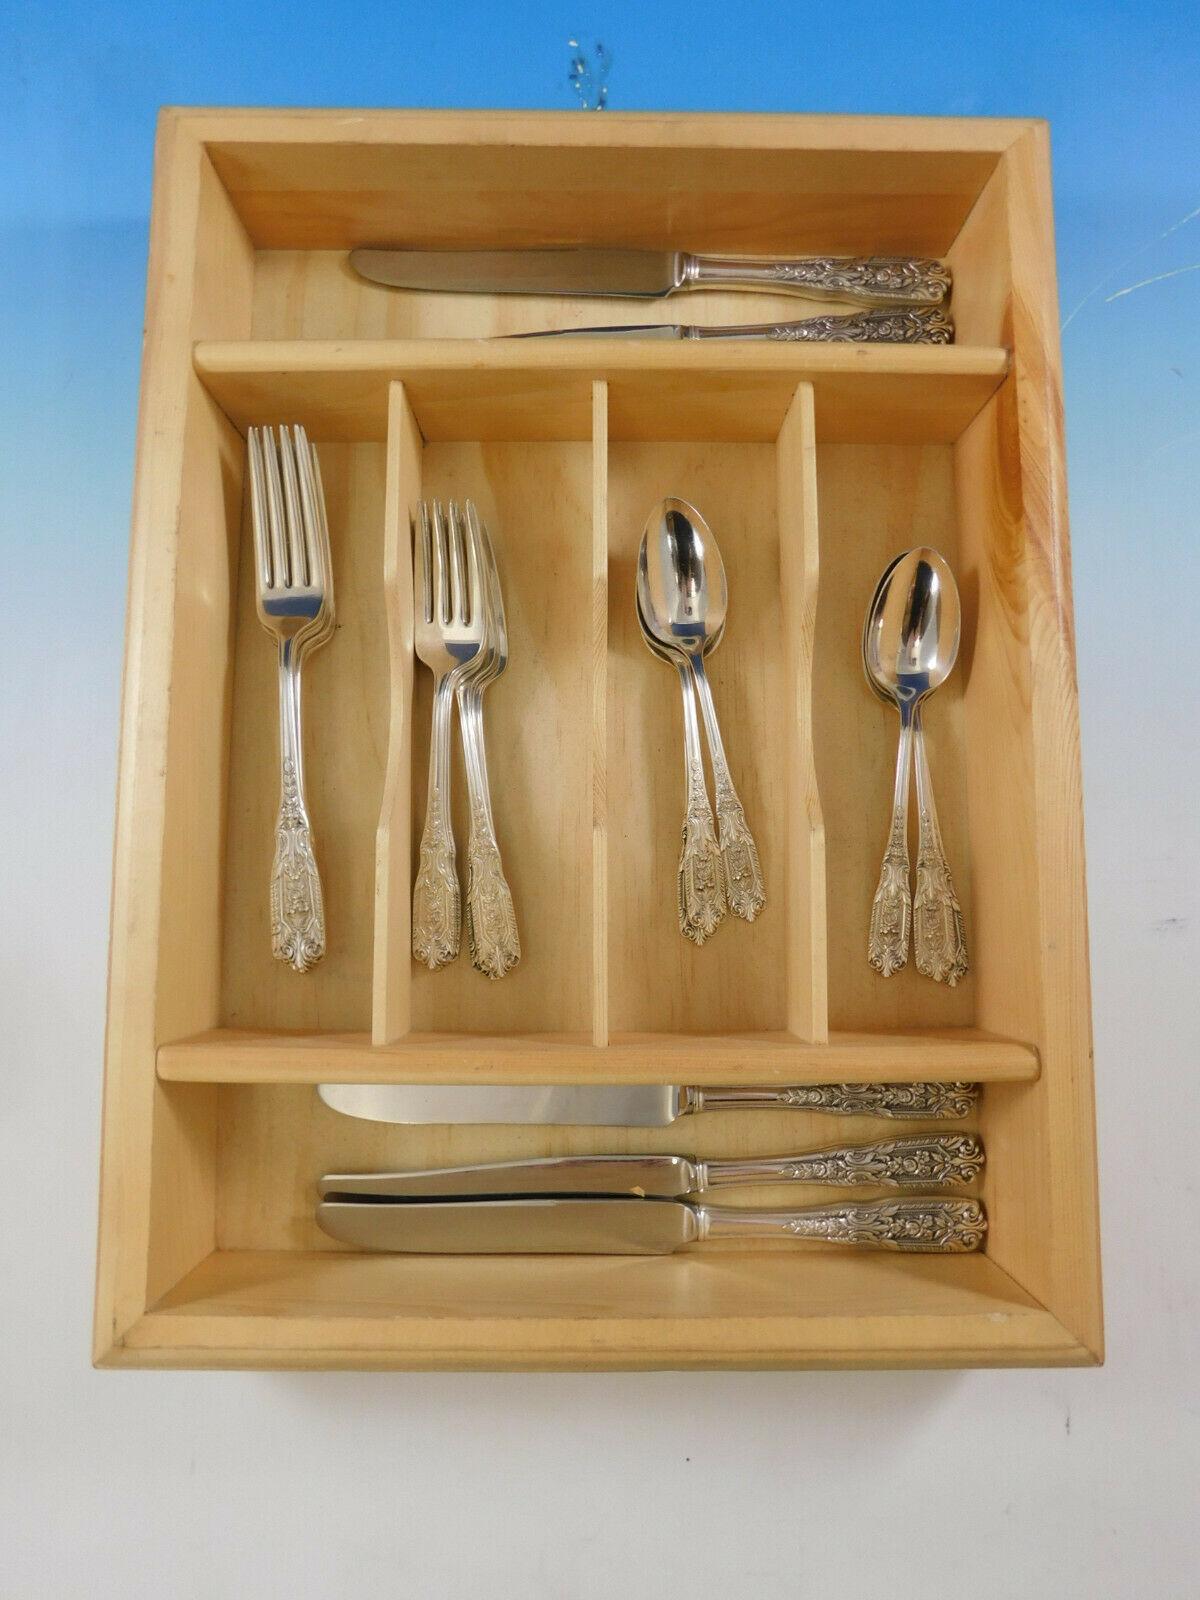 Milburn Rose by Westmorland Sterling Silver flatware set, 24 pieces. This set includes:

6 knives, 9